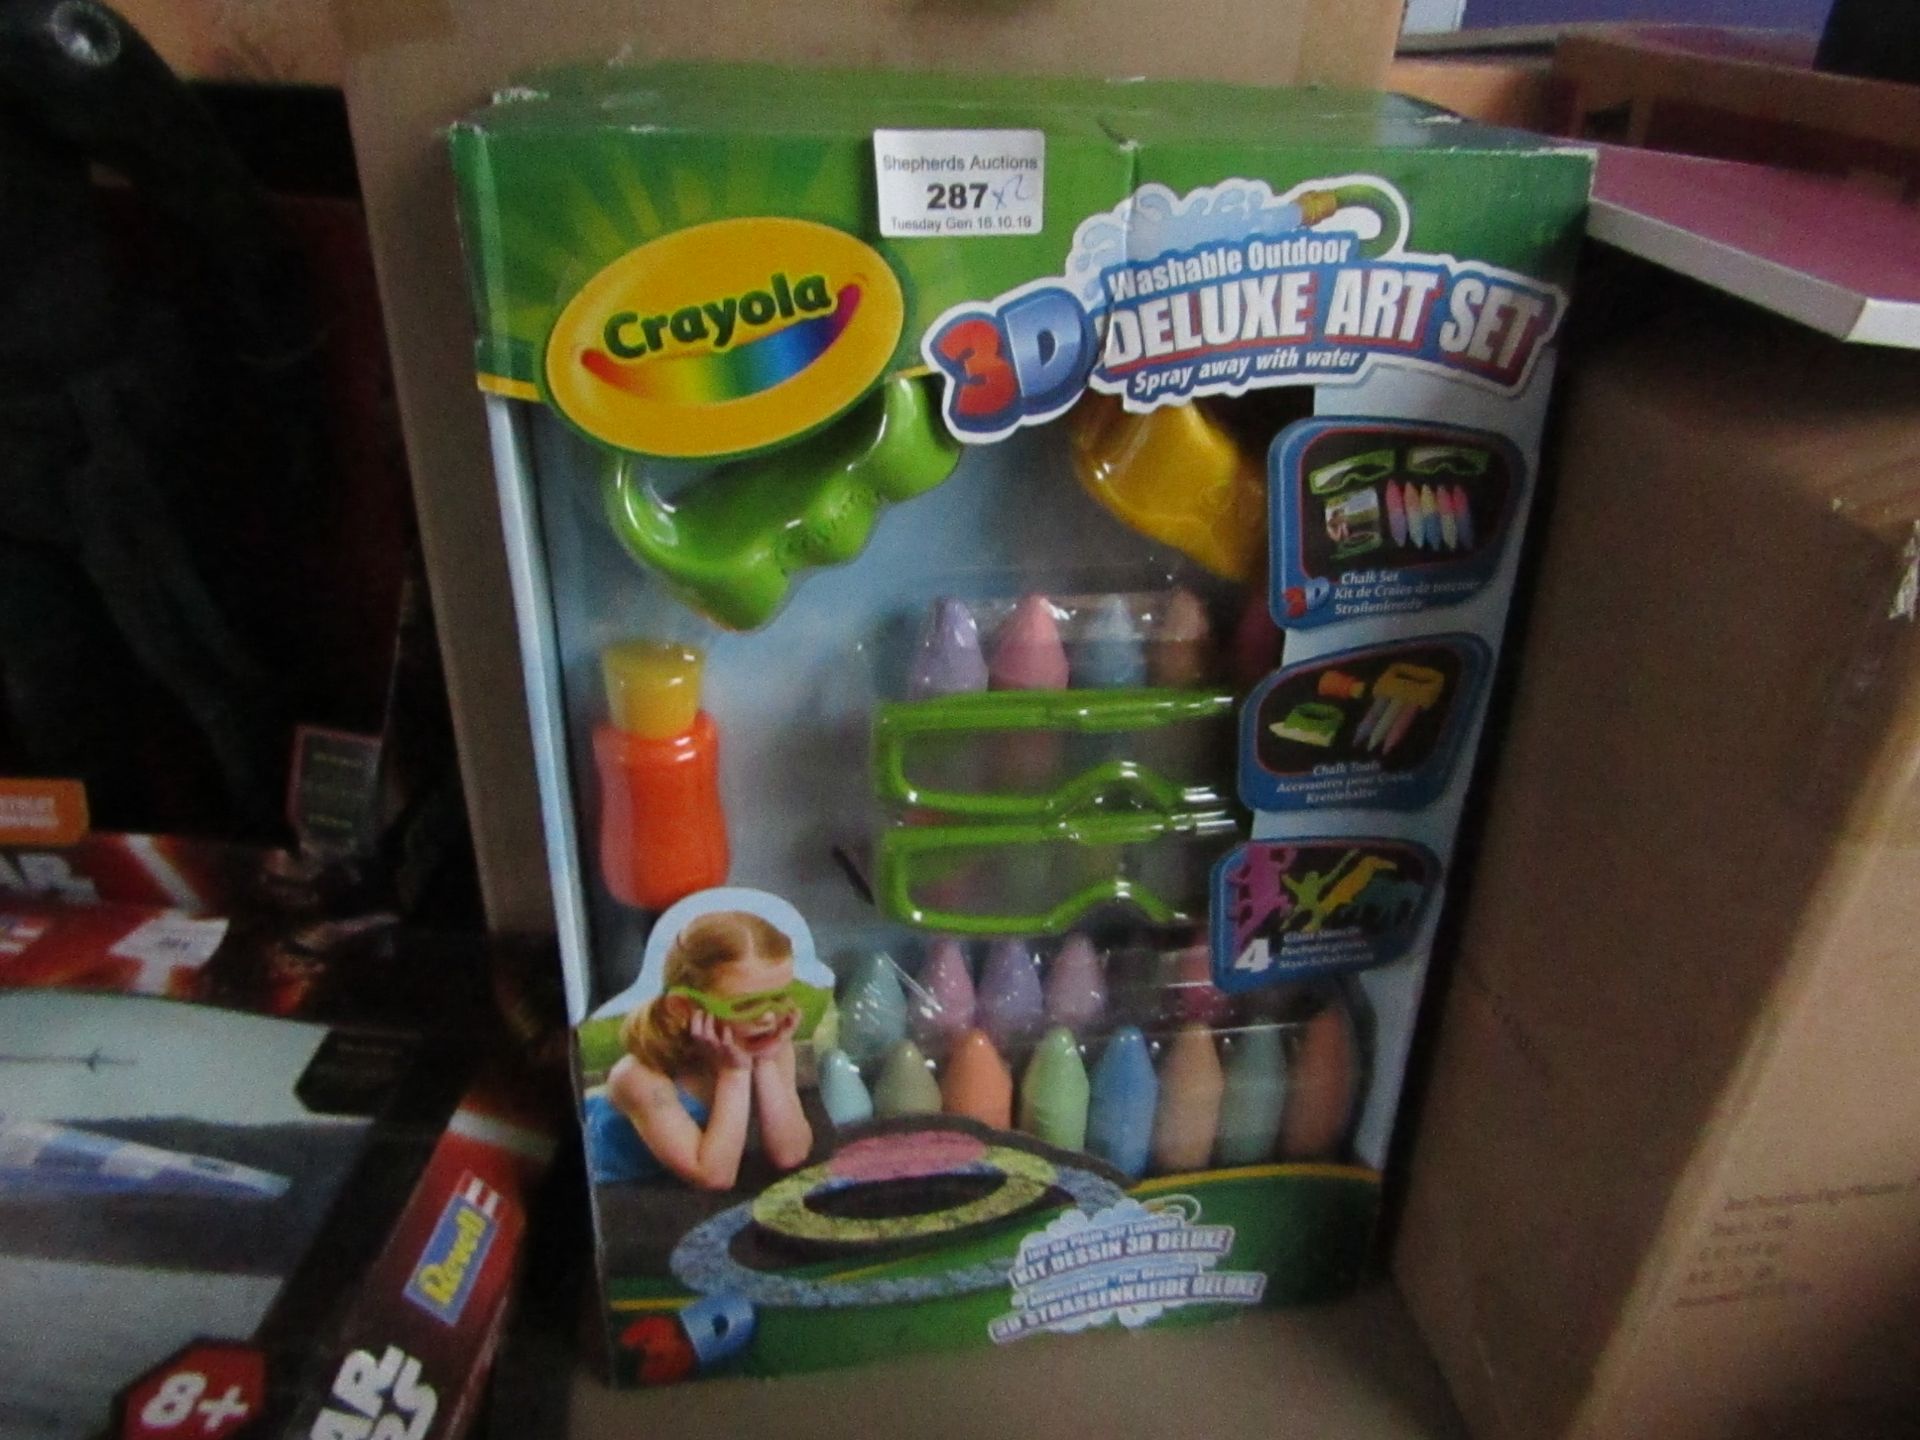 2x Crayola 3D Deluxe wahable out door art sets, new, RRP £16.99 each.